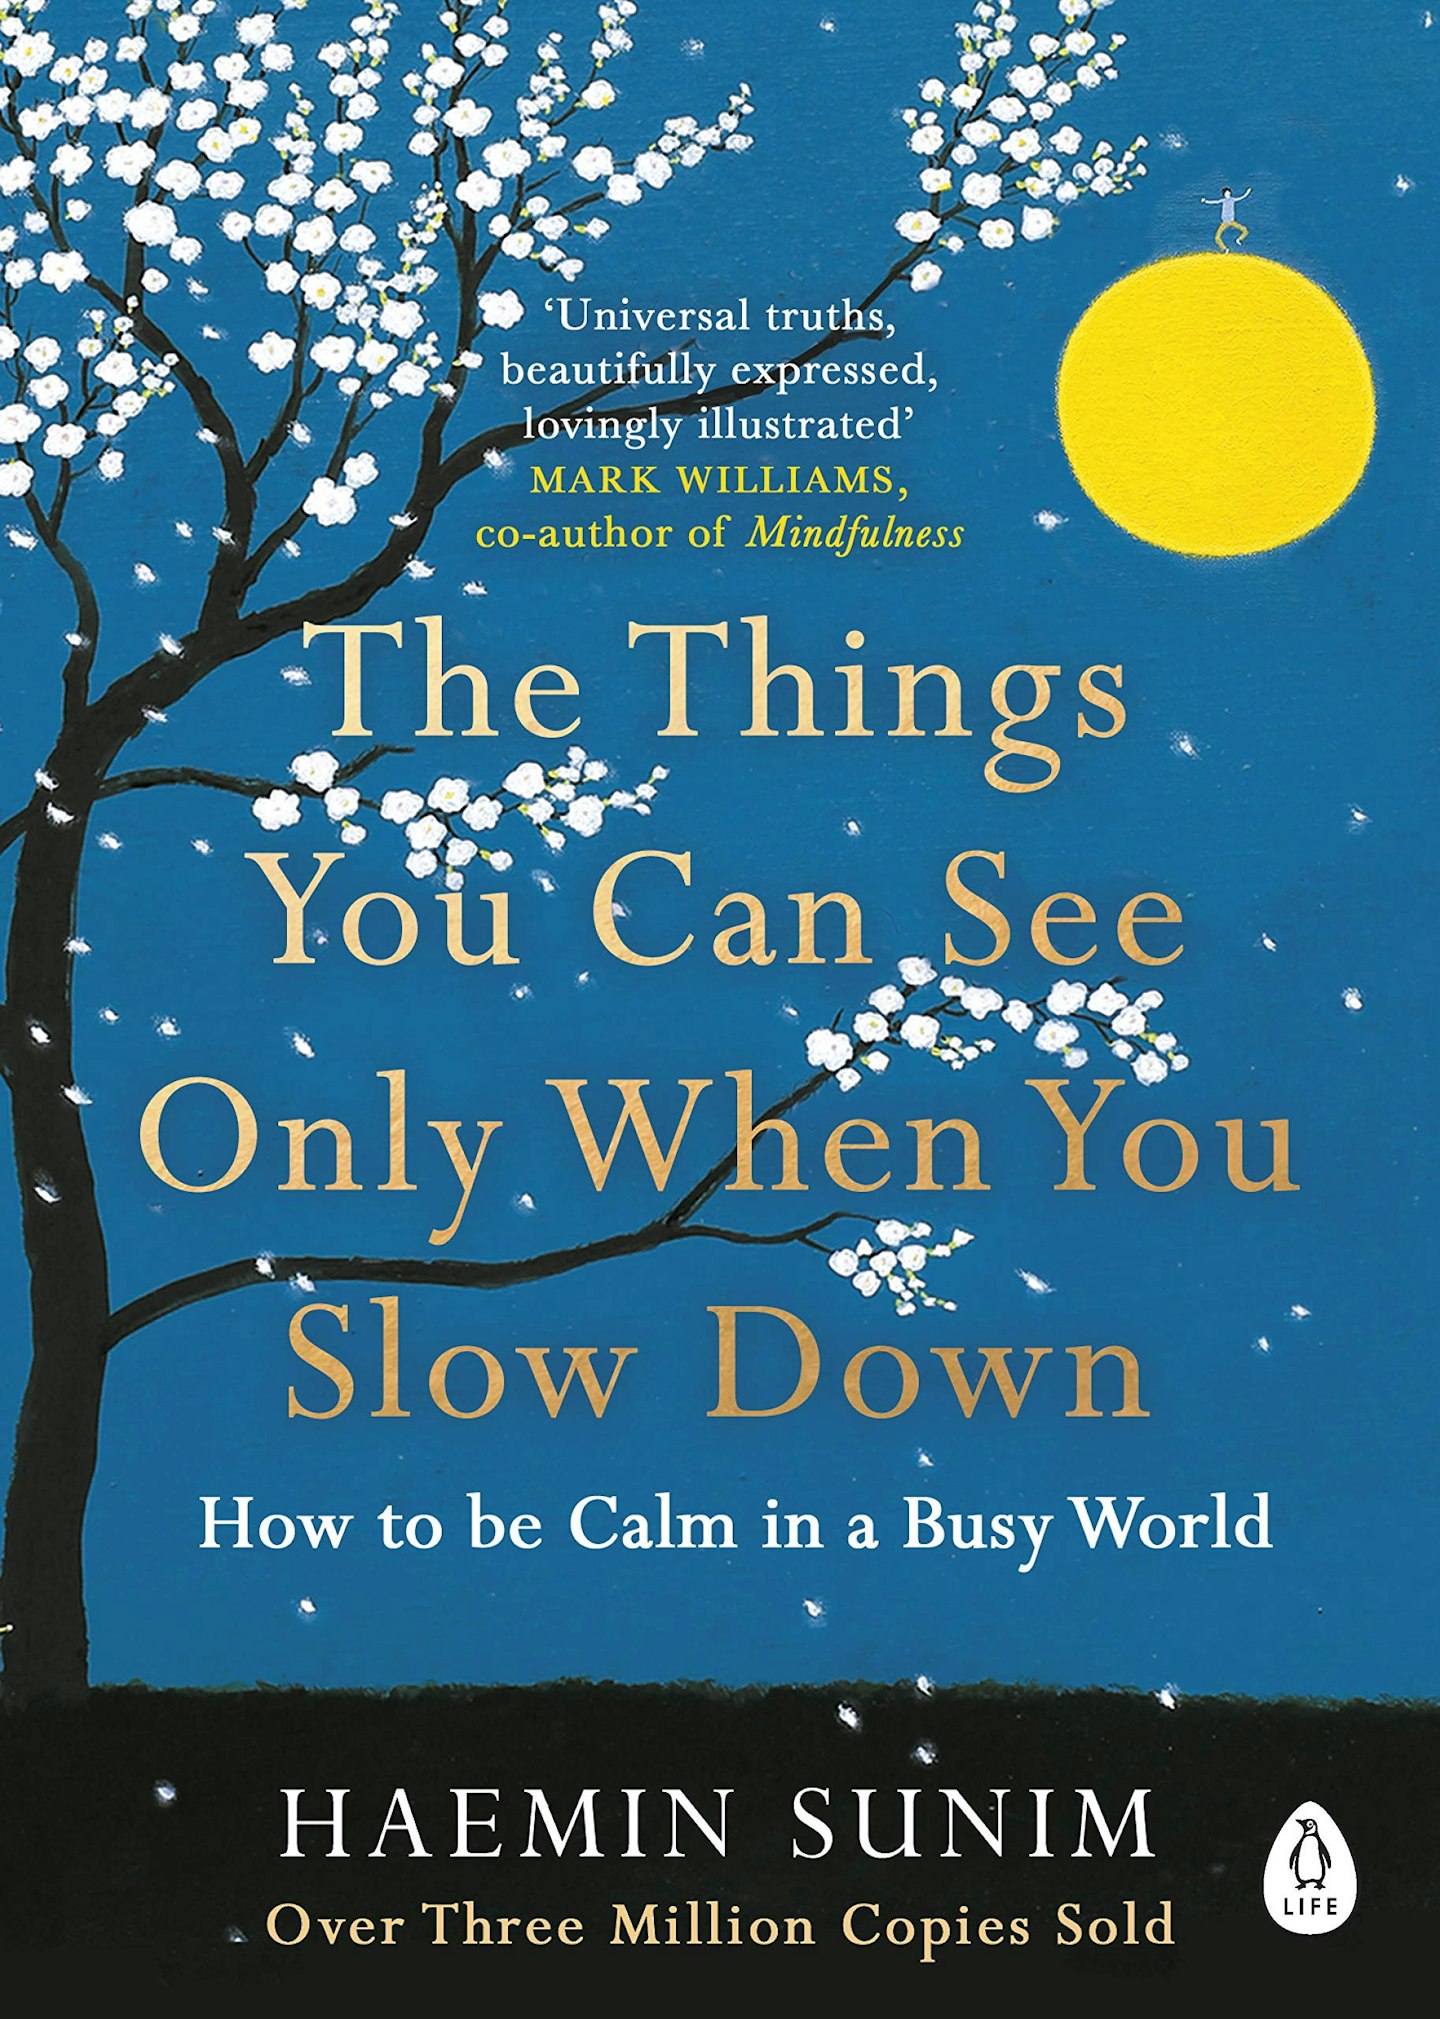 The Things You Can Only See When You Slow Down by Haemin Sunim